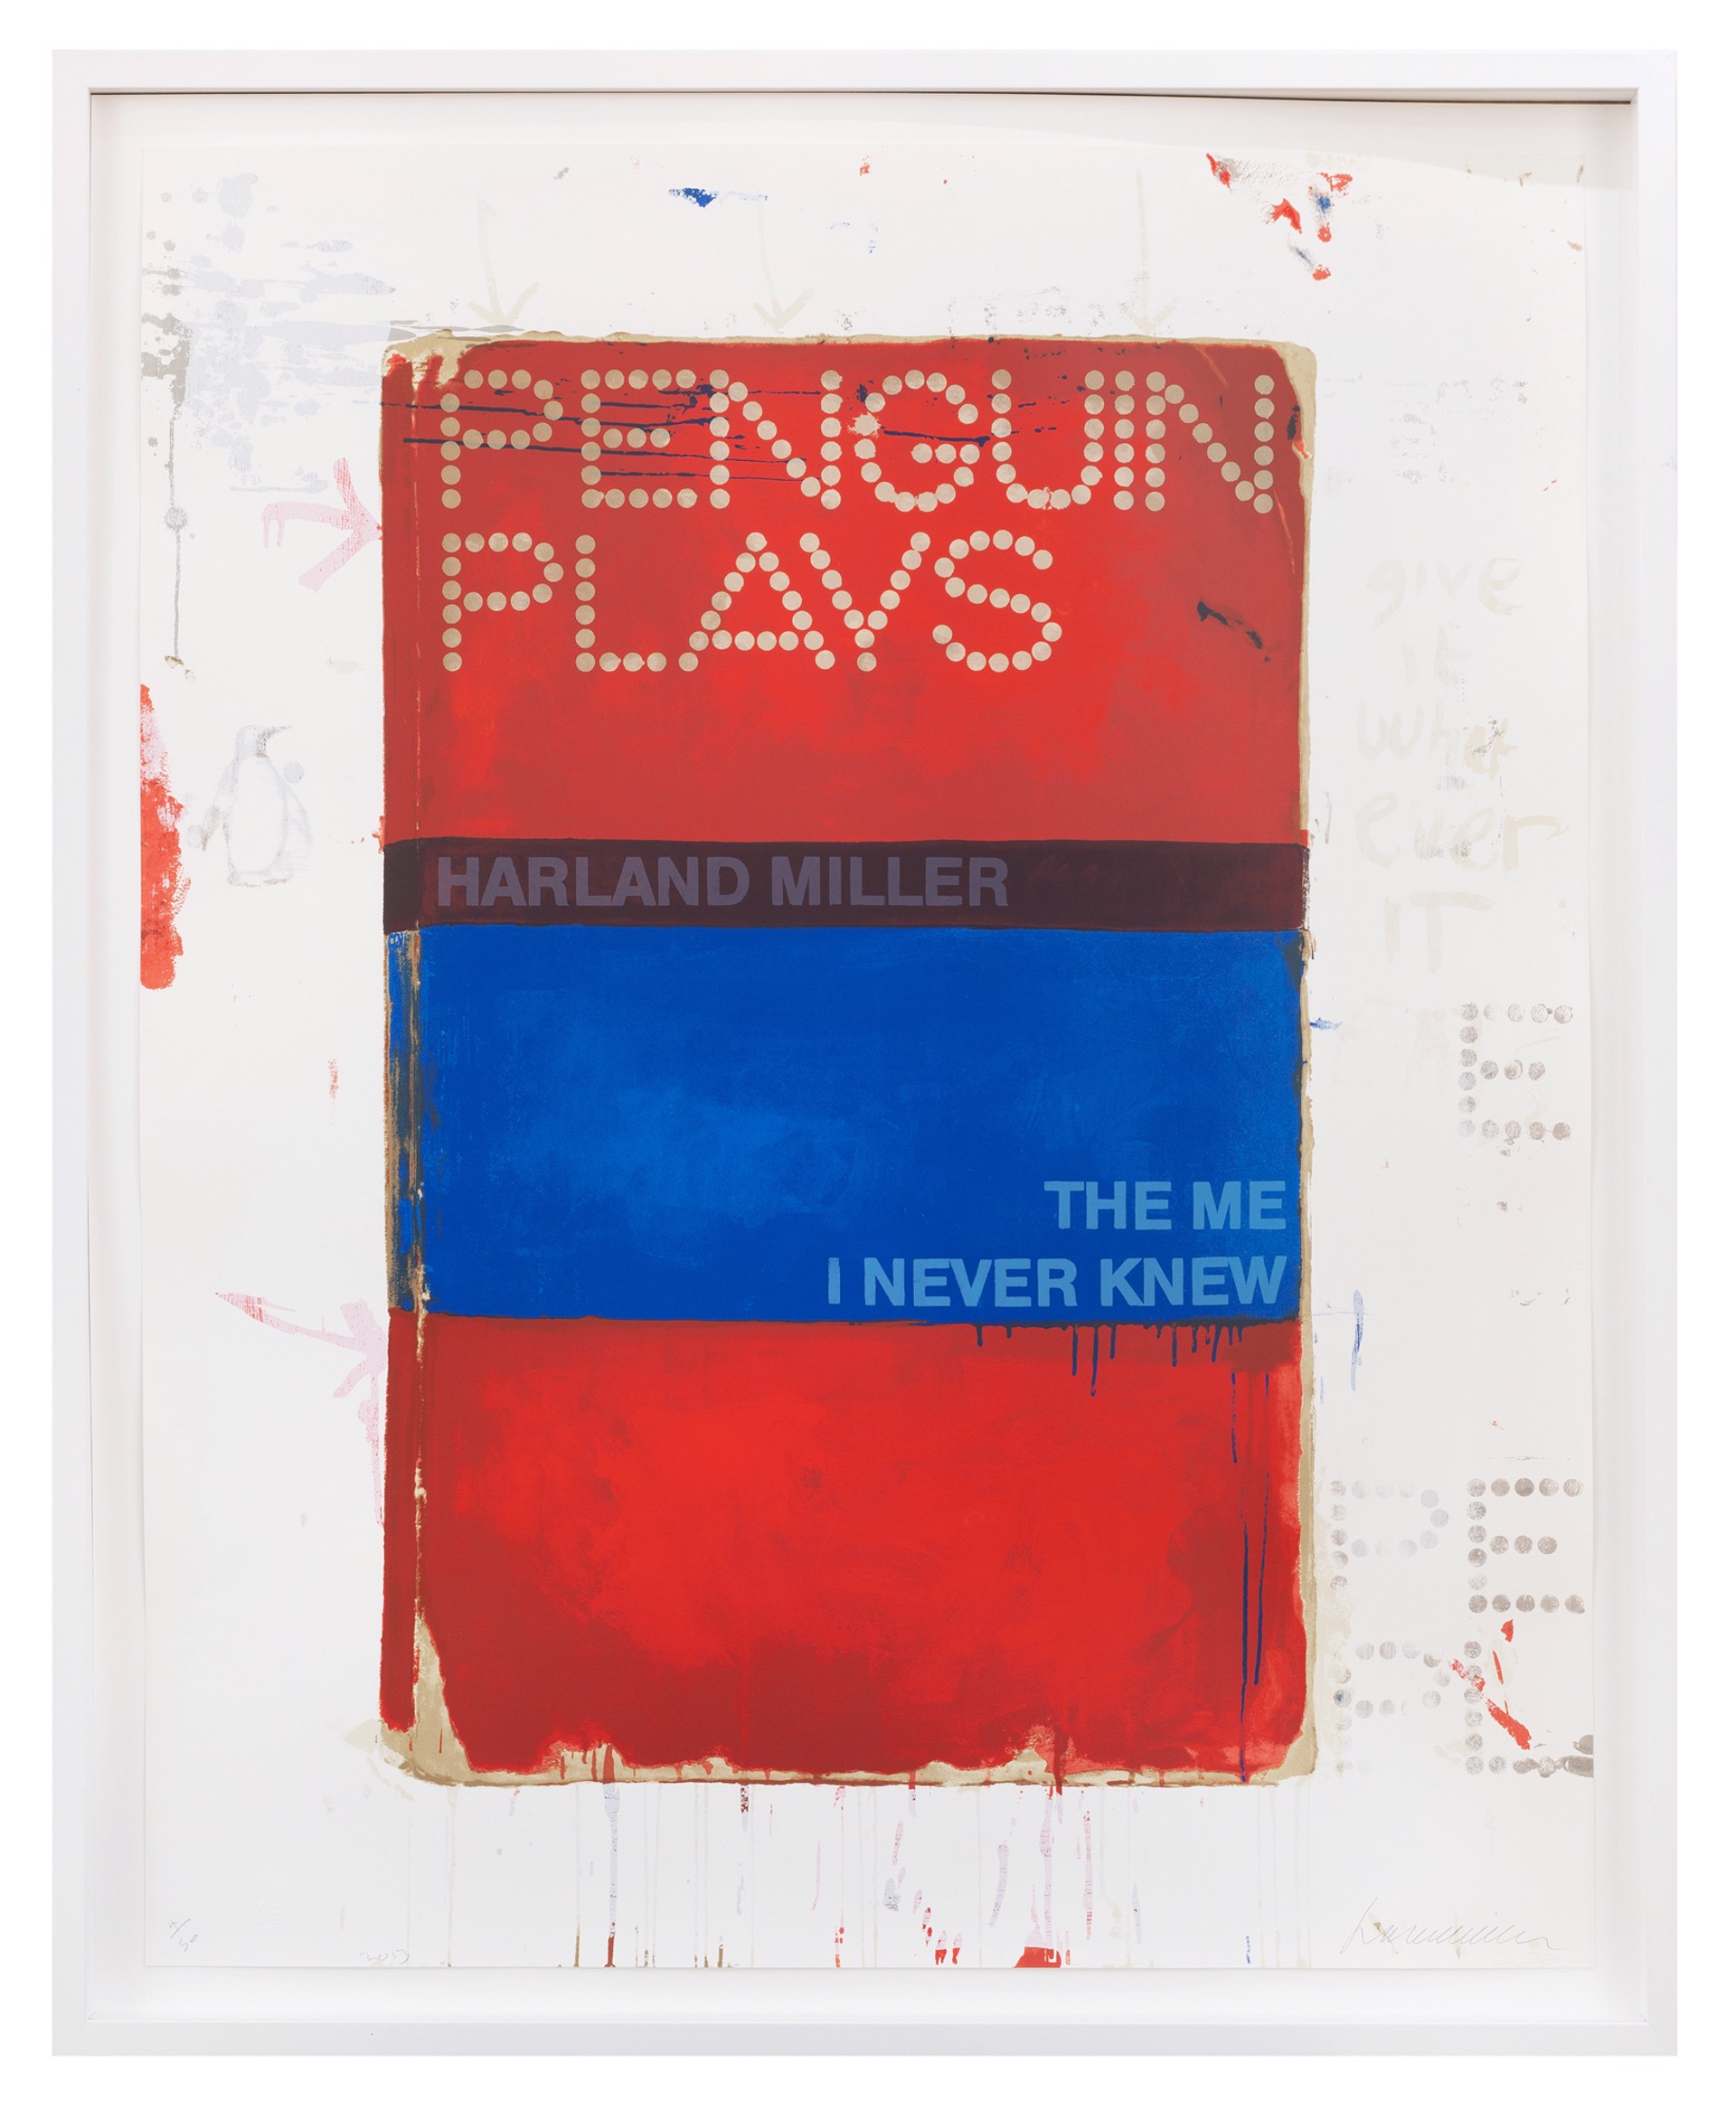 The Me I Never Knew by Harland Miller